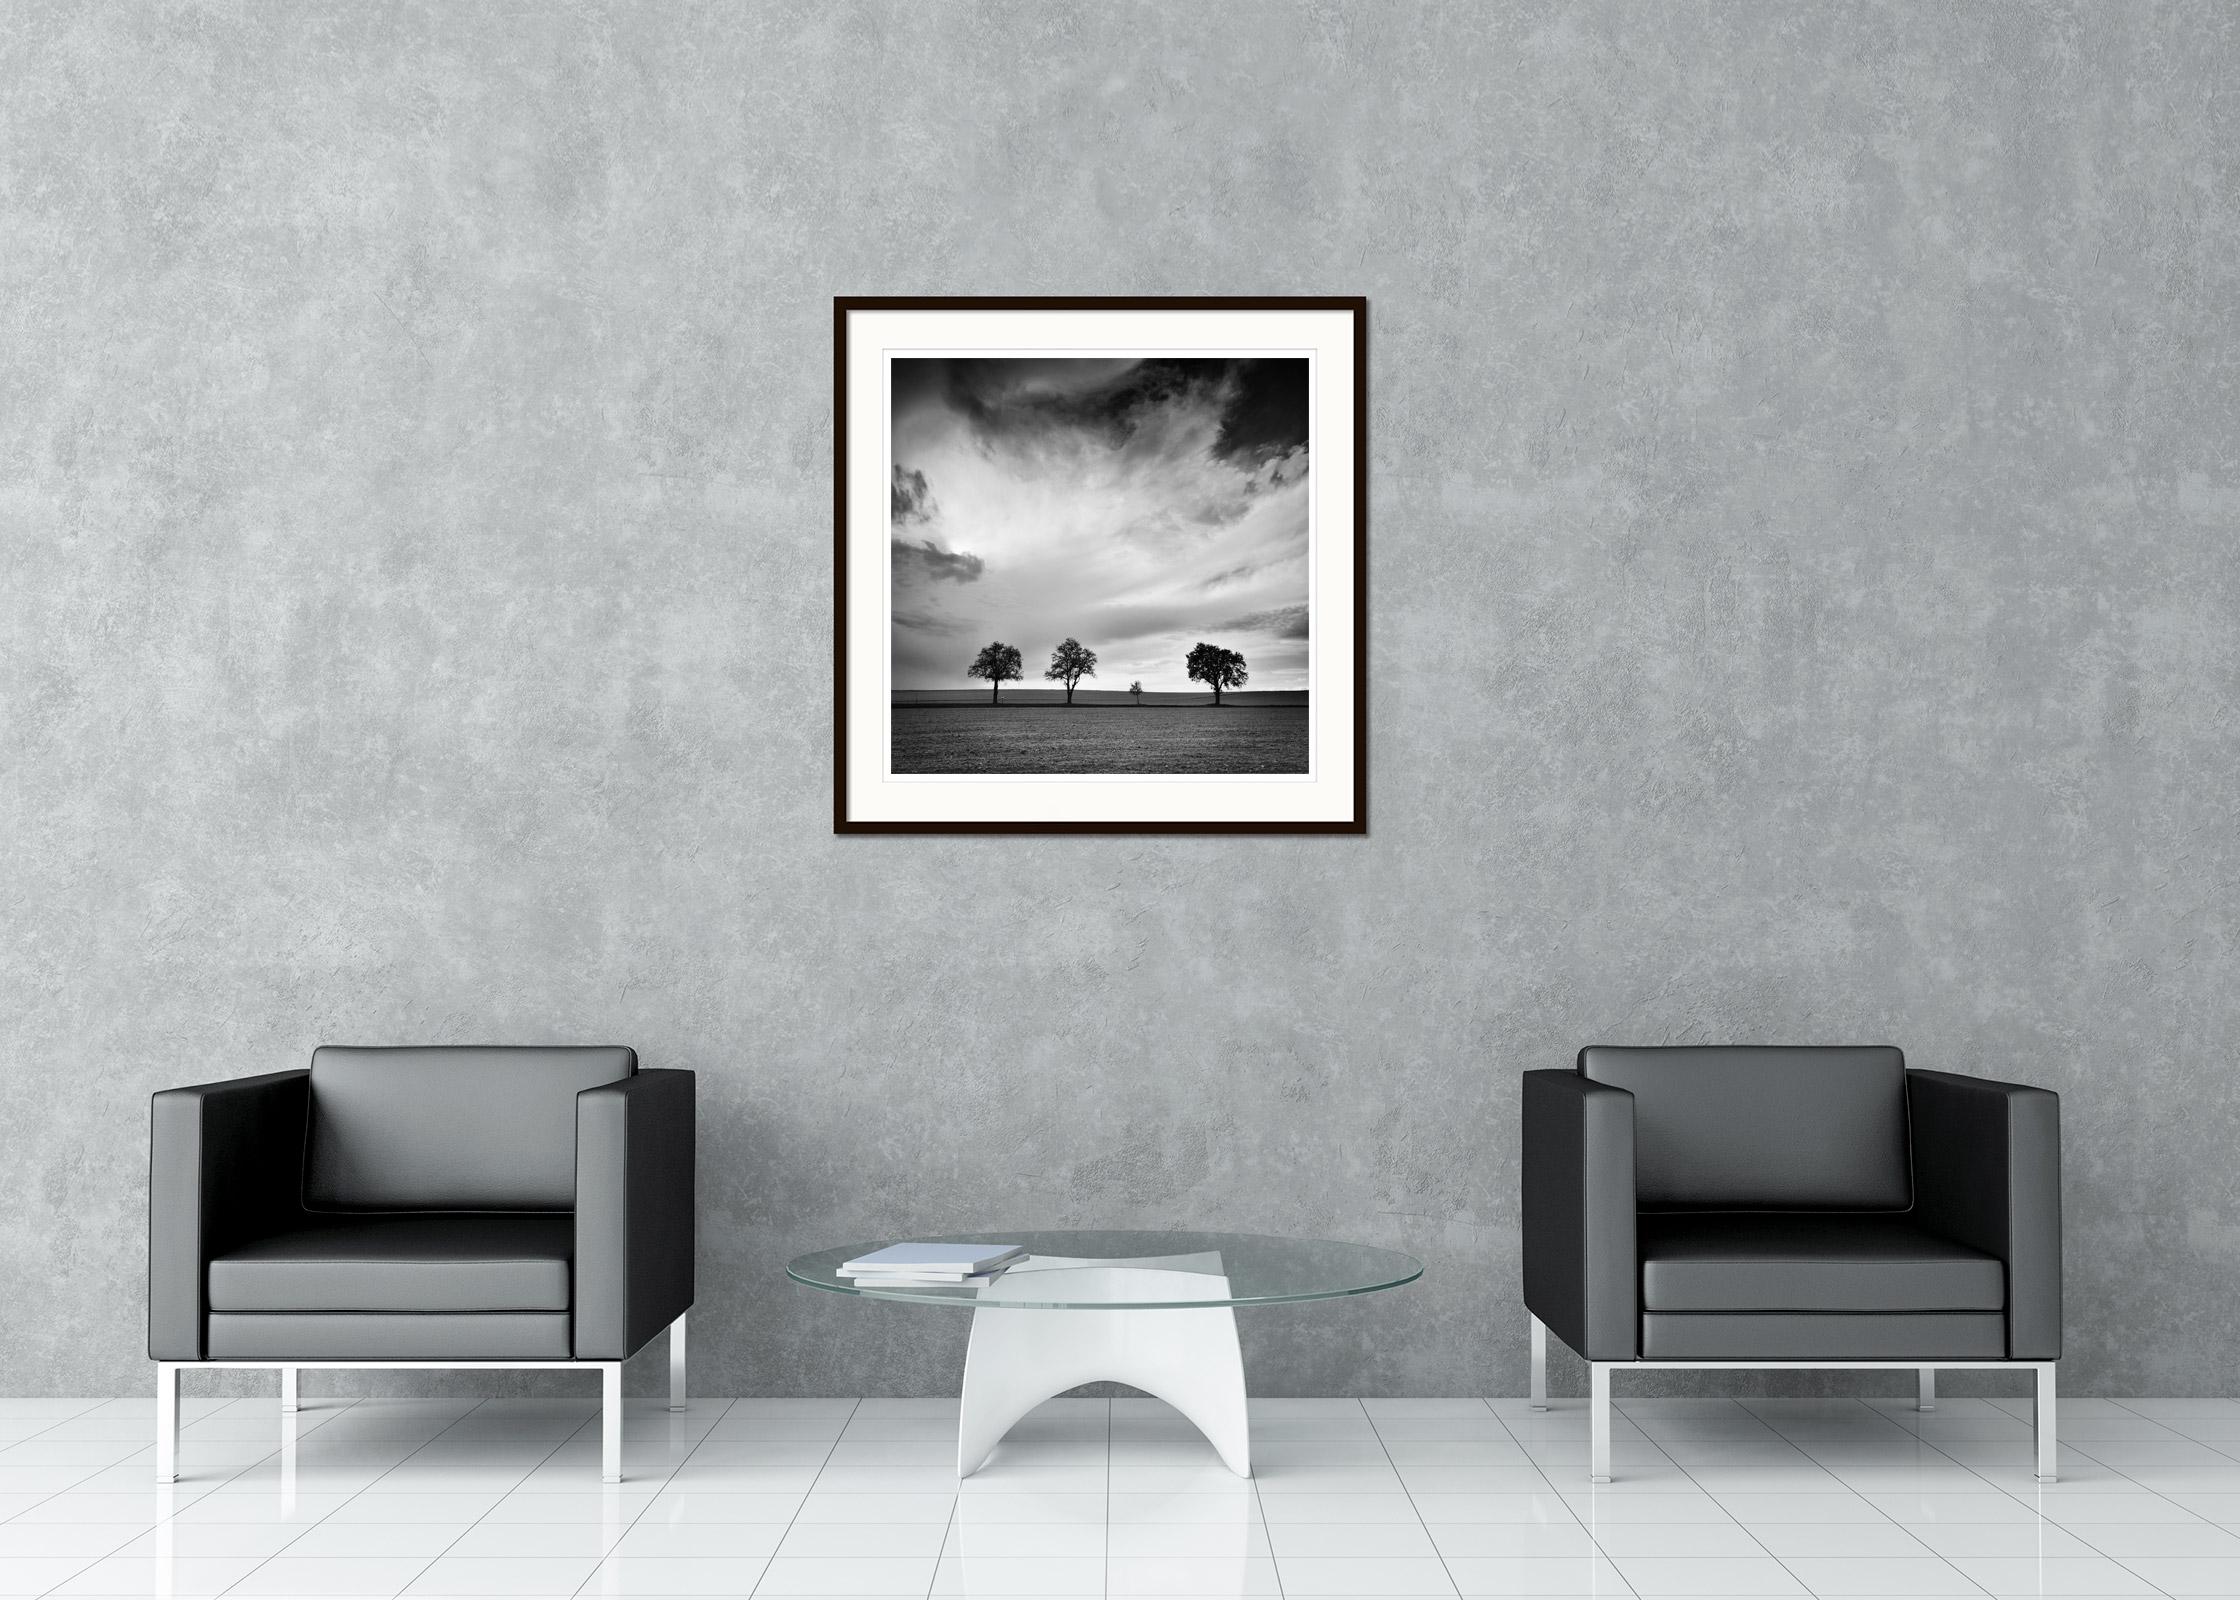 Black and white fine art landscape photography. Archival pigment ink print as part of a limited edition of 15. All Gerald Berghammer prints are made to order in limited editions on Hahnemuehle Photo Rag Baryta. Each print is stamped on the back and